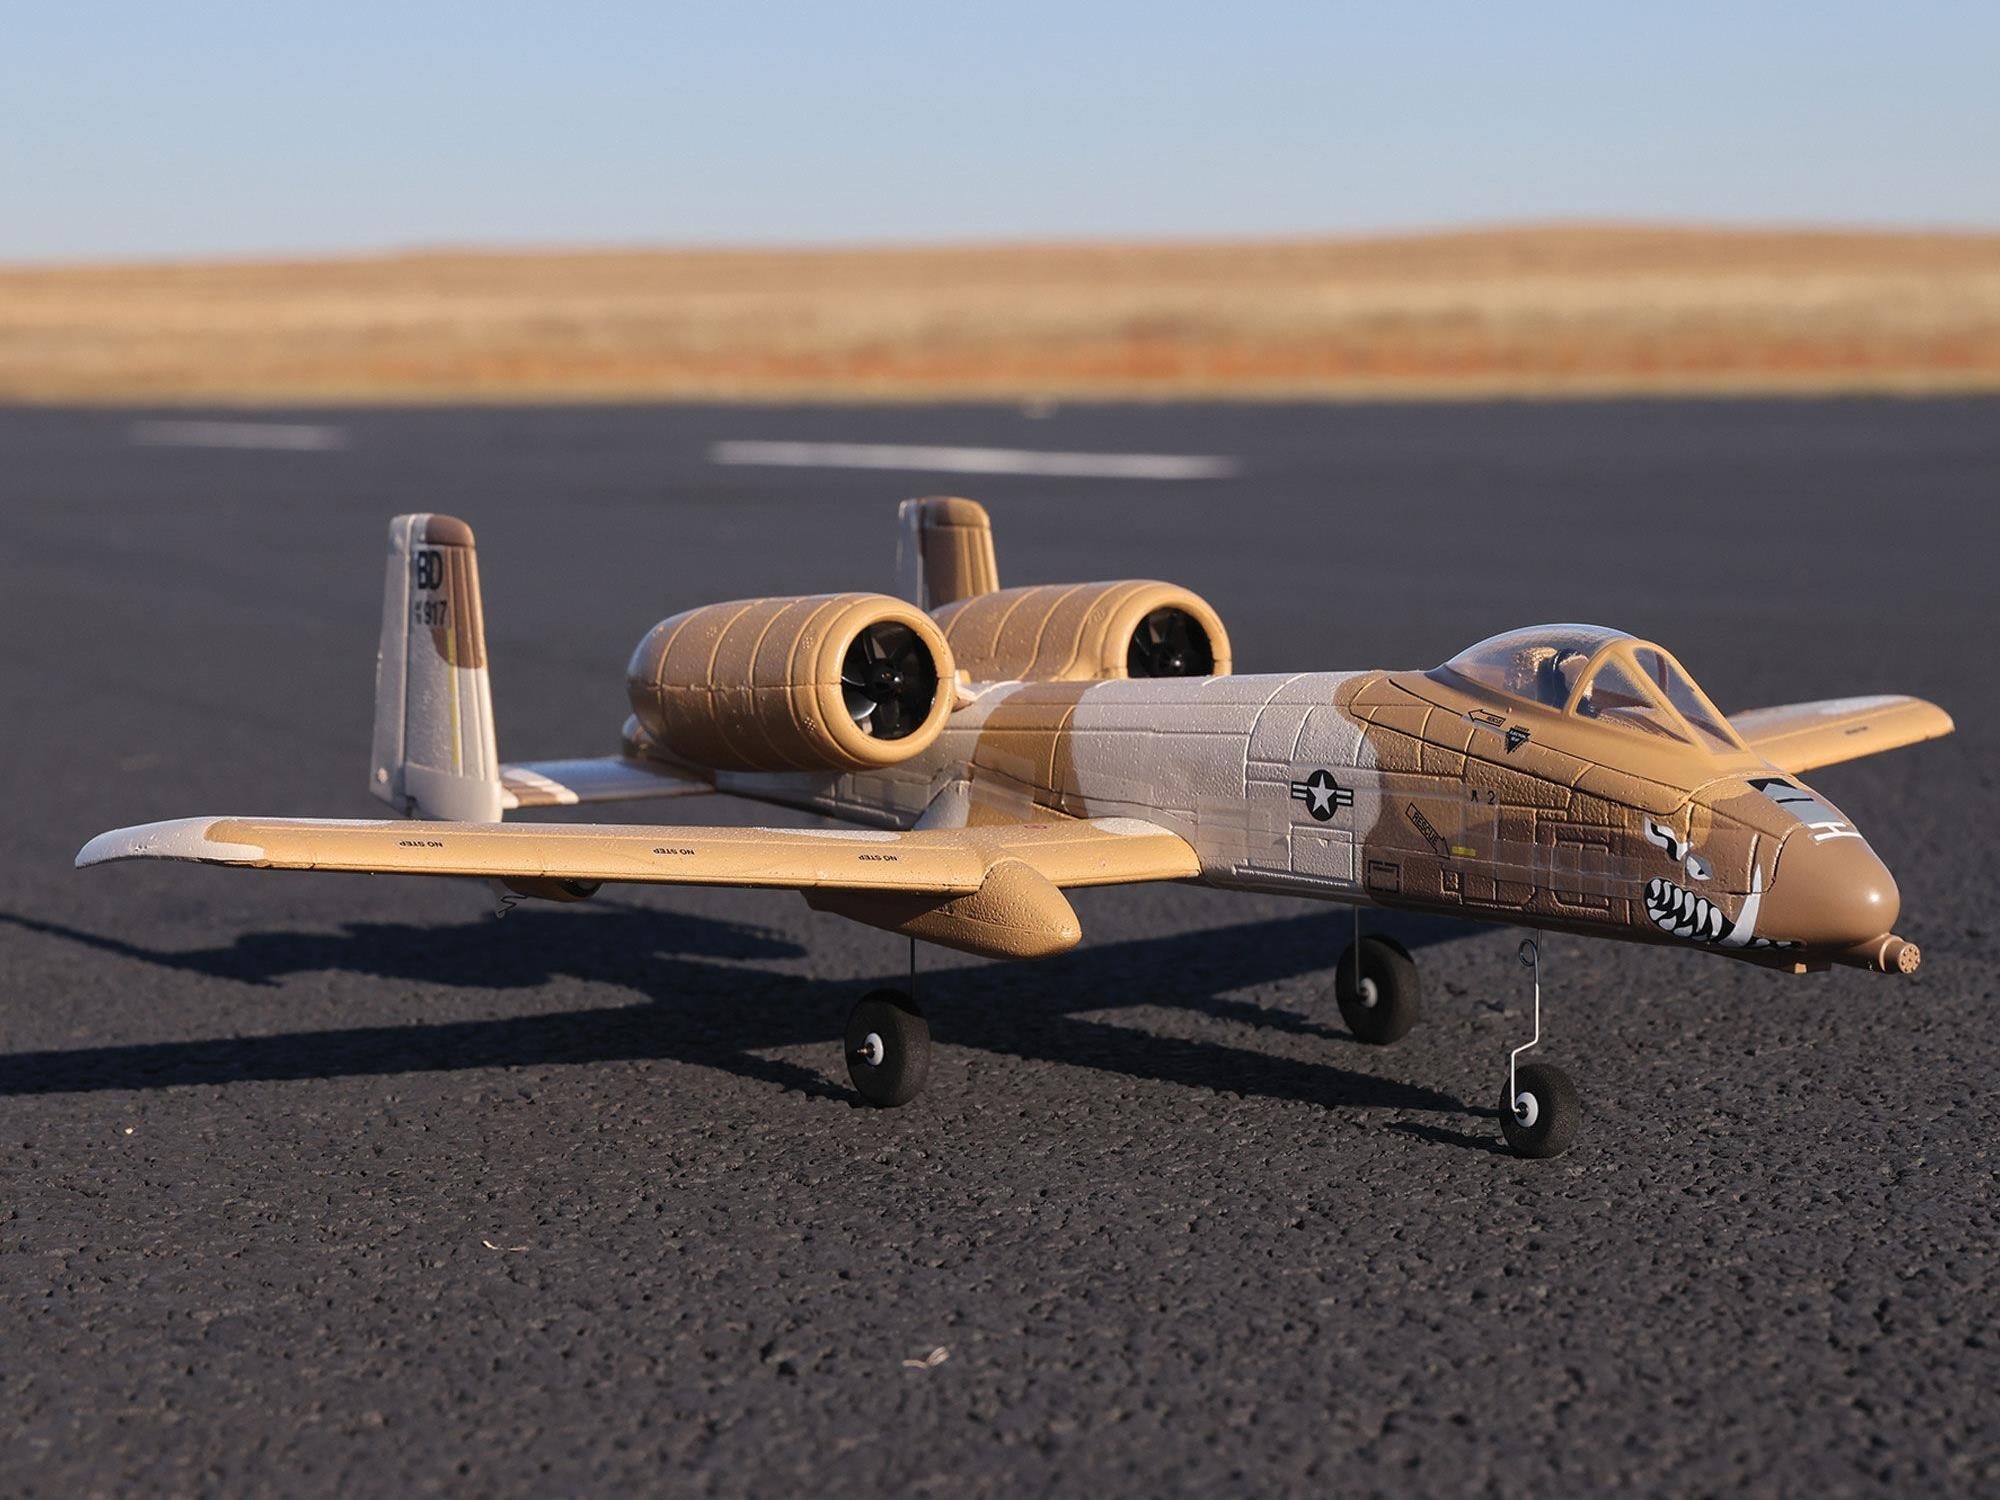 E-Flite UMX A-10 Thunderbolt II 30mm EDF BNF Basic with AS3X and SAFE Select EFLU6550